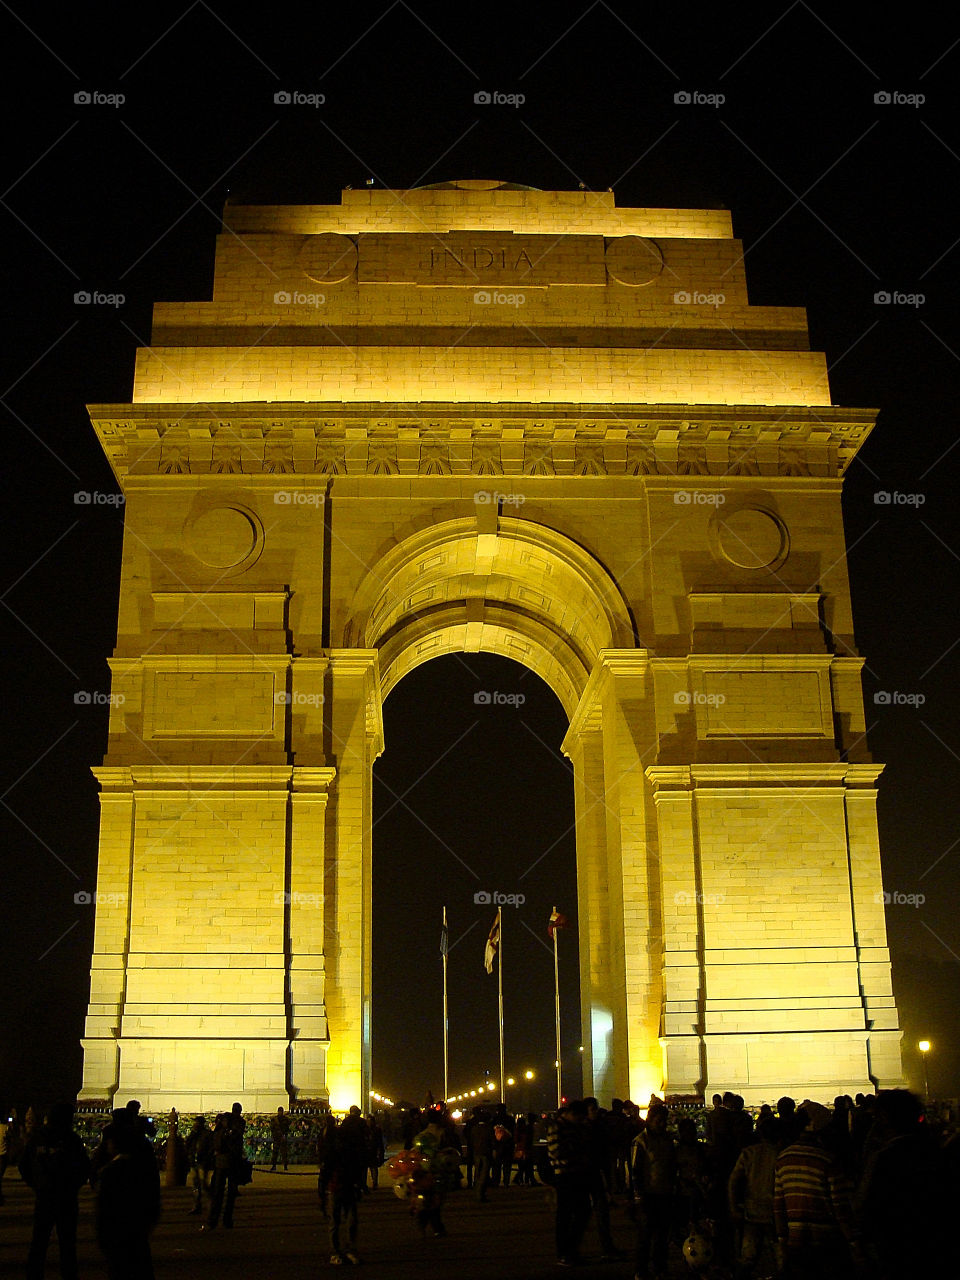 The India Gate, (originally called the All India War Memorial), is a war memorial located astride the Rajpath, on the eastern edge of the ‘ceremonial axis’ of New Delhi, India, formerly called Kingsway. India Gate is a memorial to 82,000 soldiers of the undivided Indian Army who died in the period 1914–21 in the First World War, in France, Flanders, Mesopotamia, Persia, East Africa, Gallipoli and elsewhere in the Near and the Far East, and the Third Anglo-Afghan War. 13,300 servicemen's names, including some soldiers and officers from the United Kingdom, are inscribed on the gate.[1][2] The India Gate, even though a war memorial, evokes the architectural style of the triumphal archlike the Arch of Constantine, outside the Colosseum in Rome, and is often compared to the Arc de Triomphe in Paris, and the Gateway of India in Mumbai. It was designed by Sir Edwin Lutyens.[1]